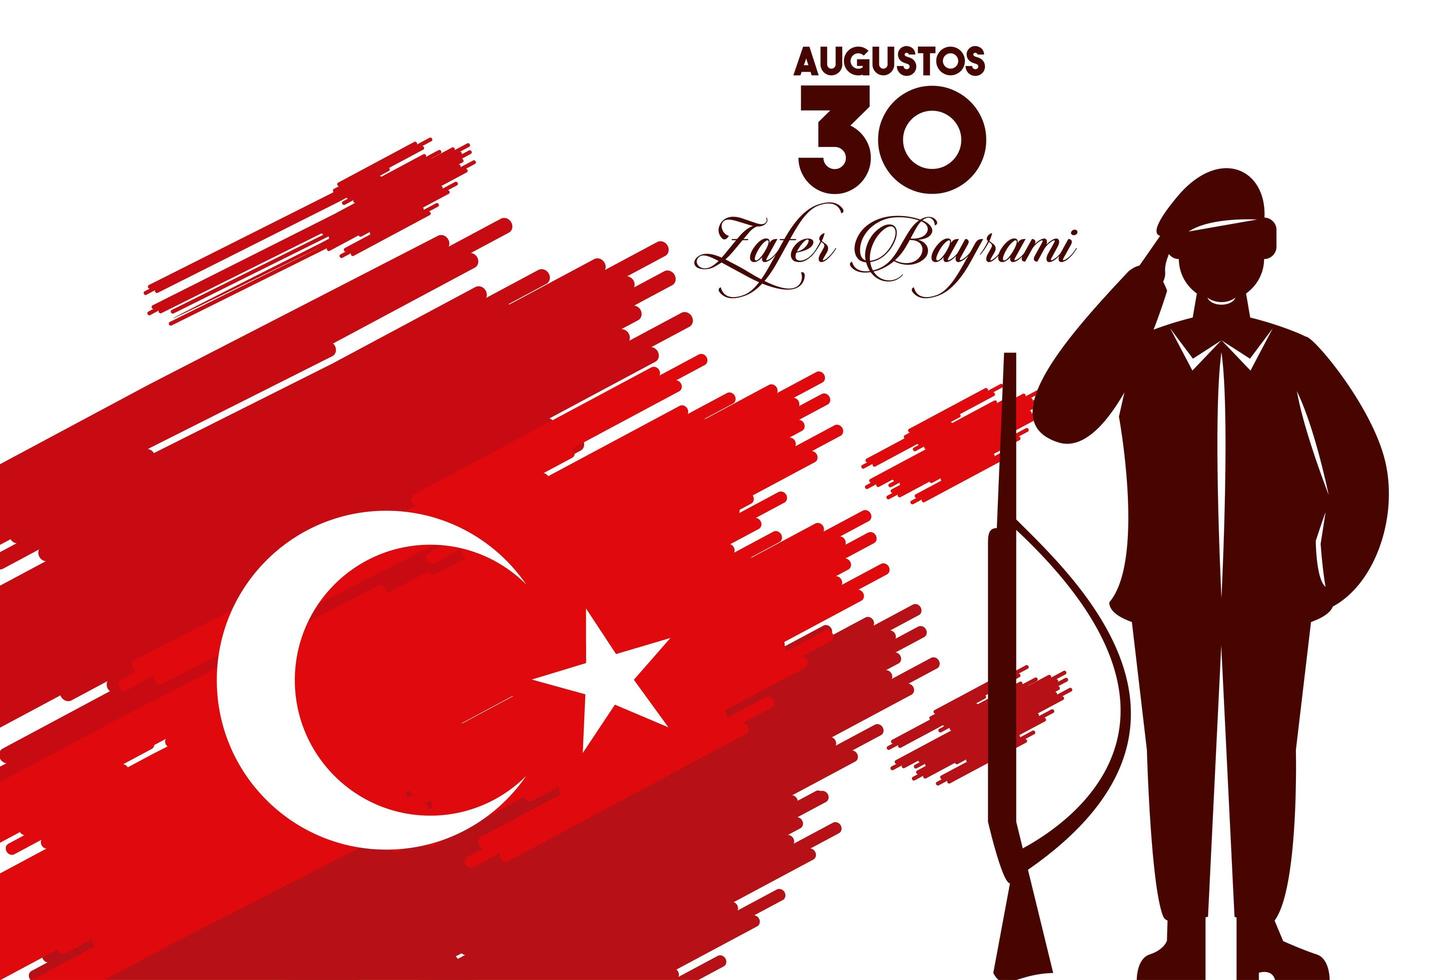 zafer bayrami celebration with soldier and weapon in flag vector